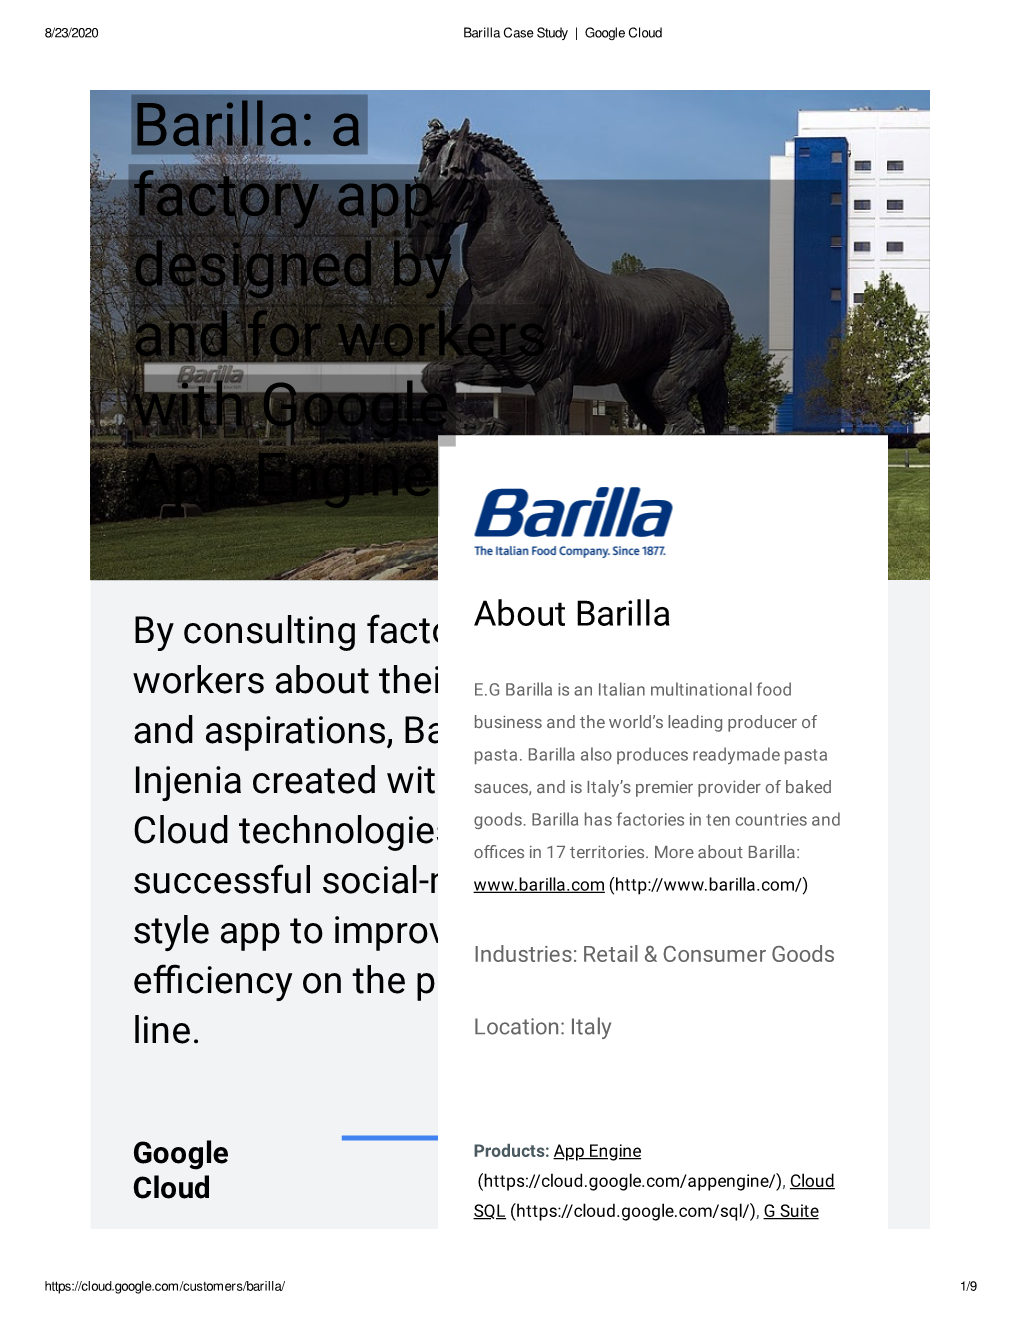 Barilla: a Factory App Designed by and for Workers with Google App Engine